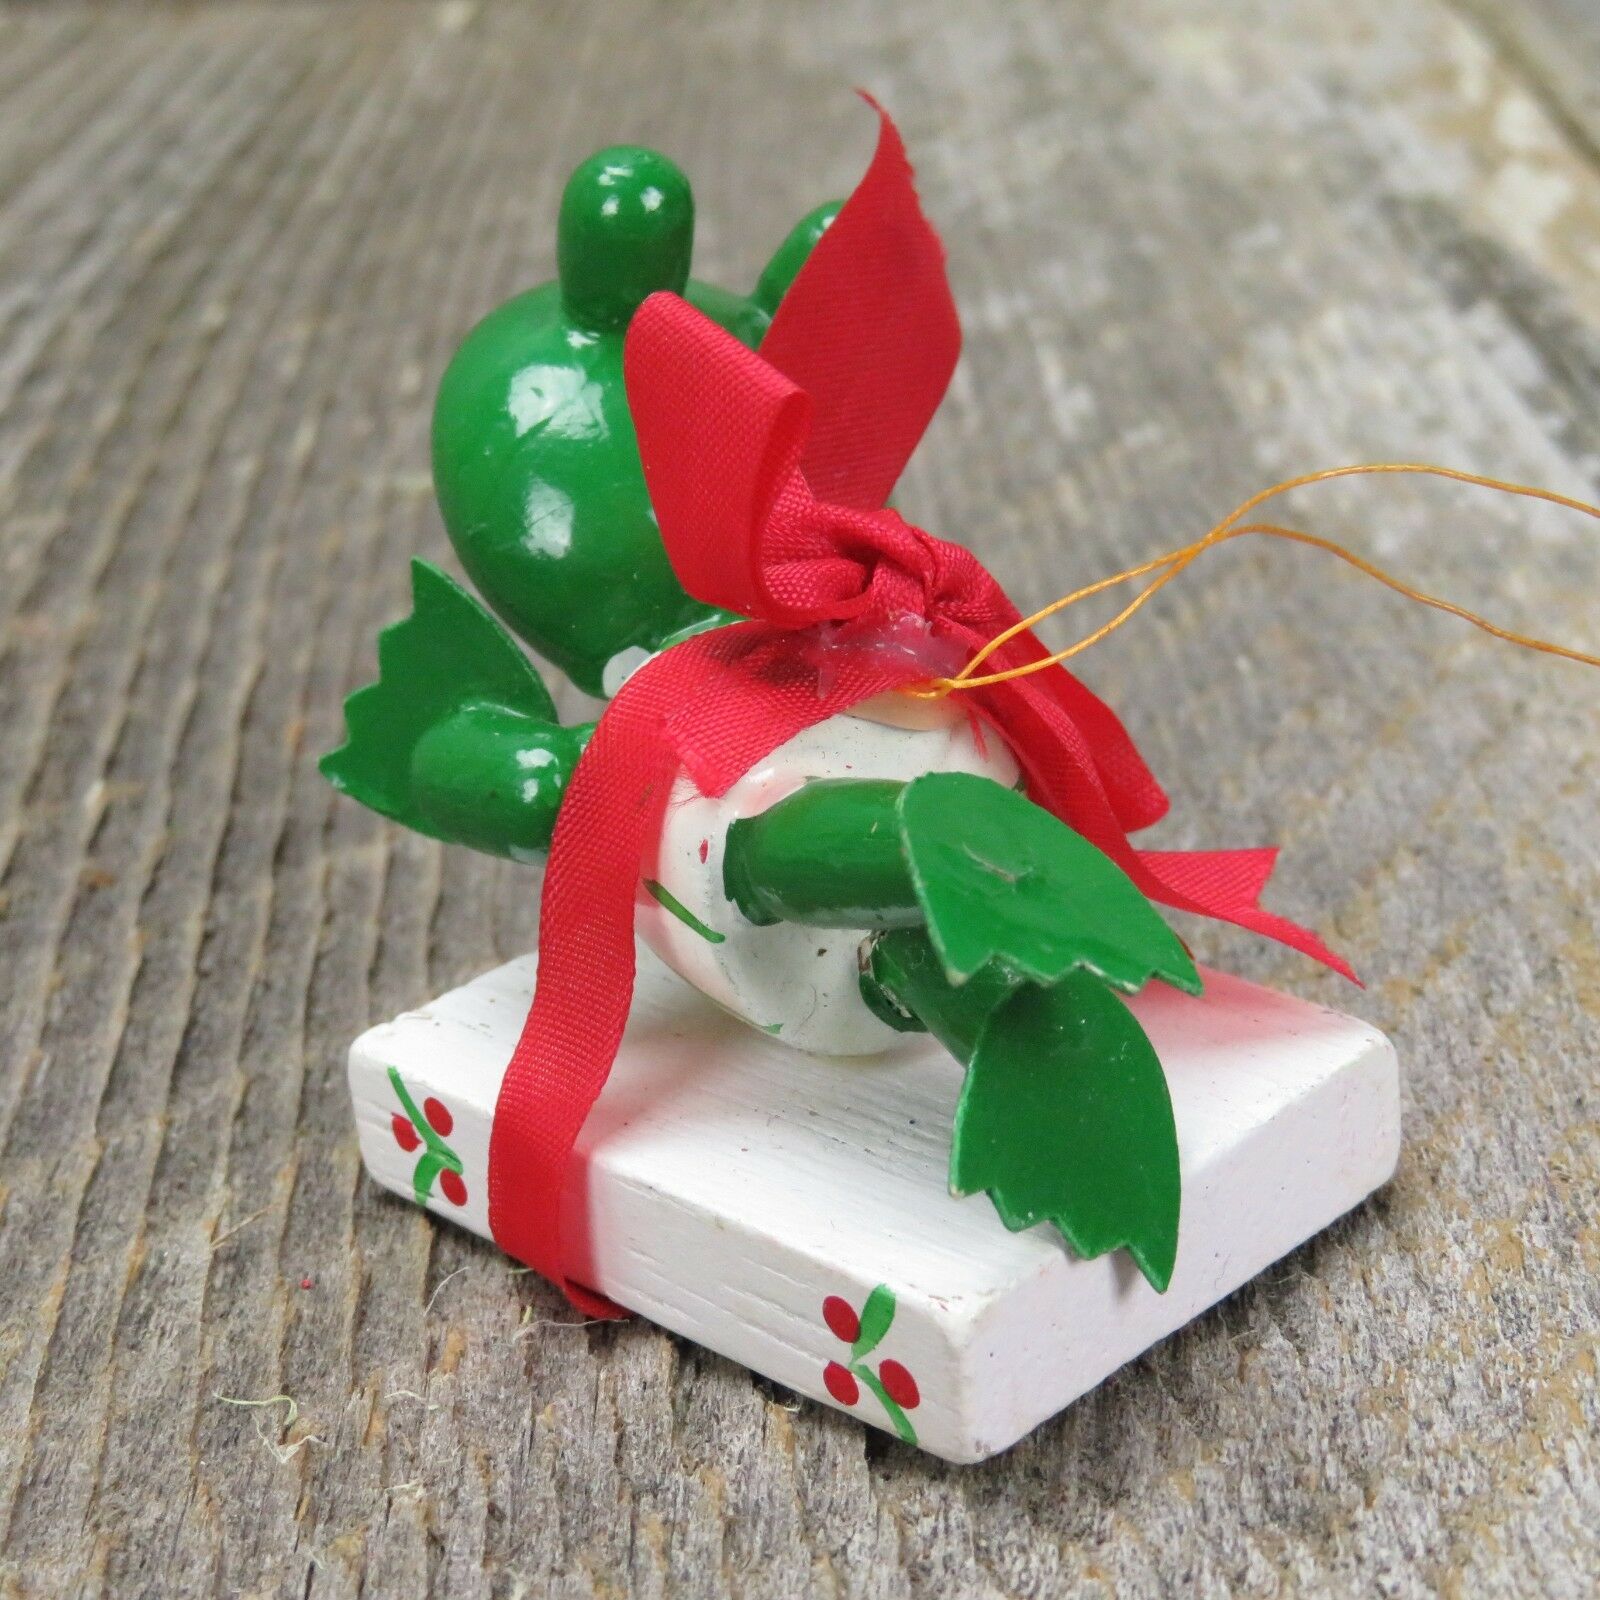 Vintage Frog Toad Ornament Wooden Christmas Wood Green Candy Cane Sled Set - At Grandma's Table